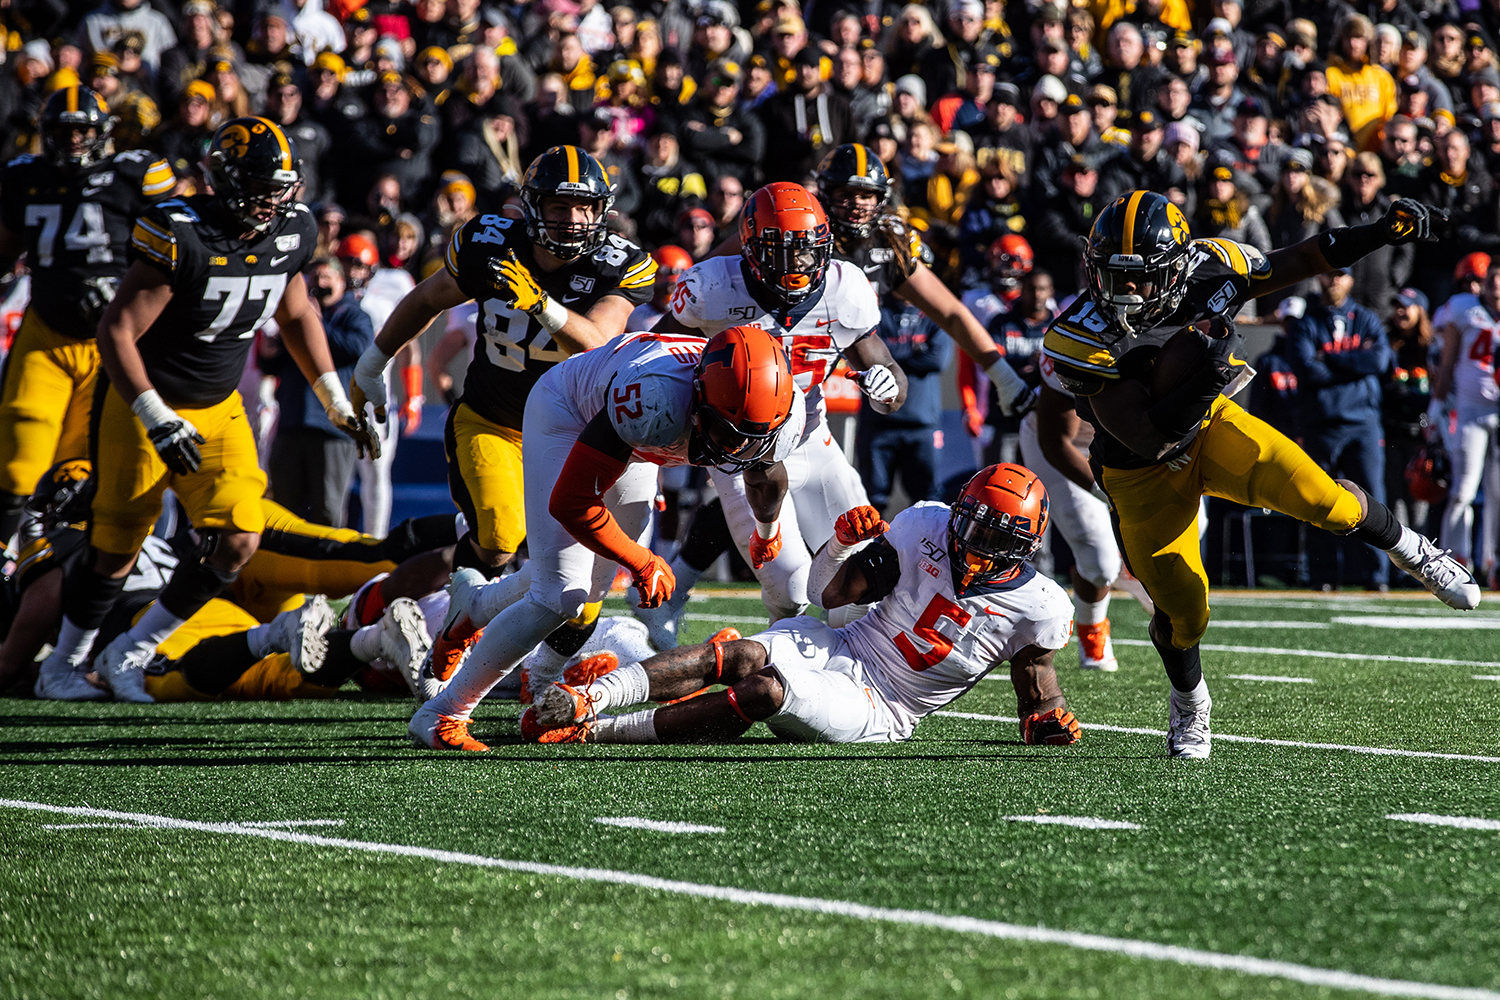 IowaIllinois game replay available anywhere online?